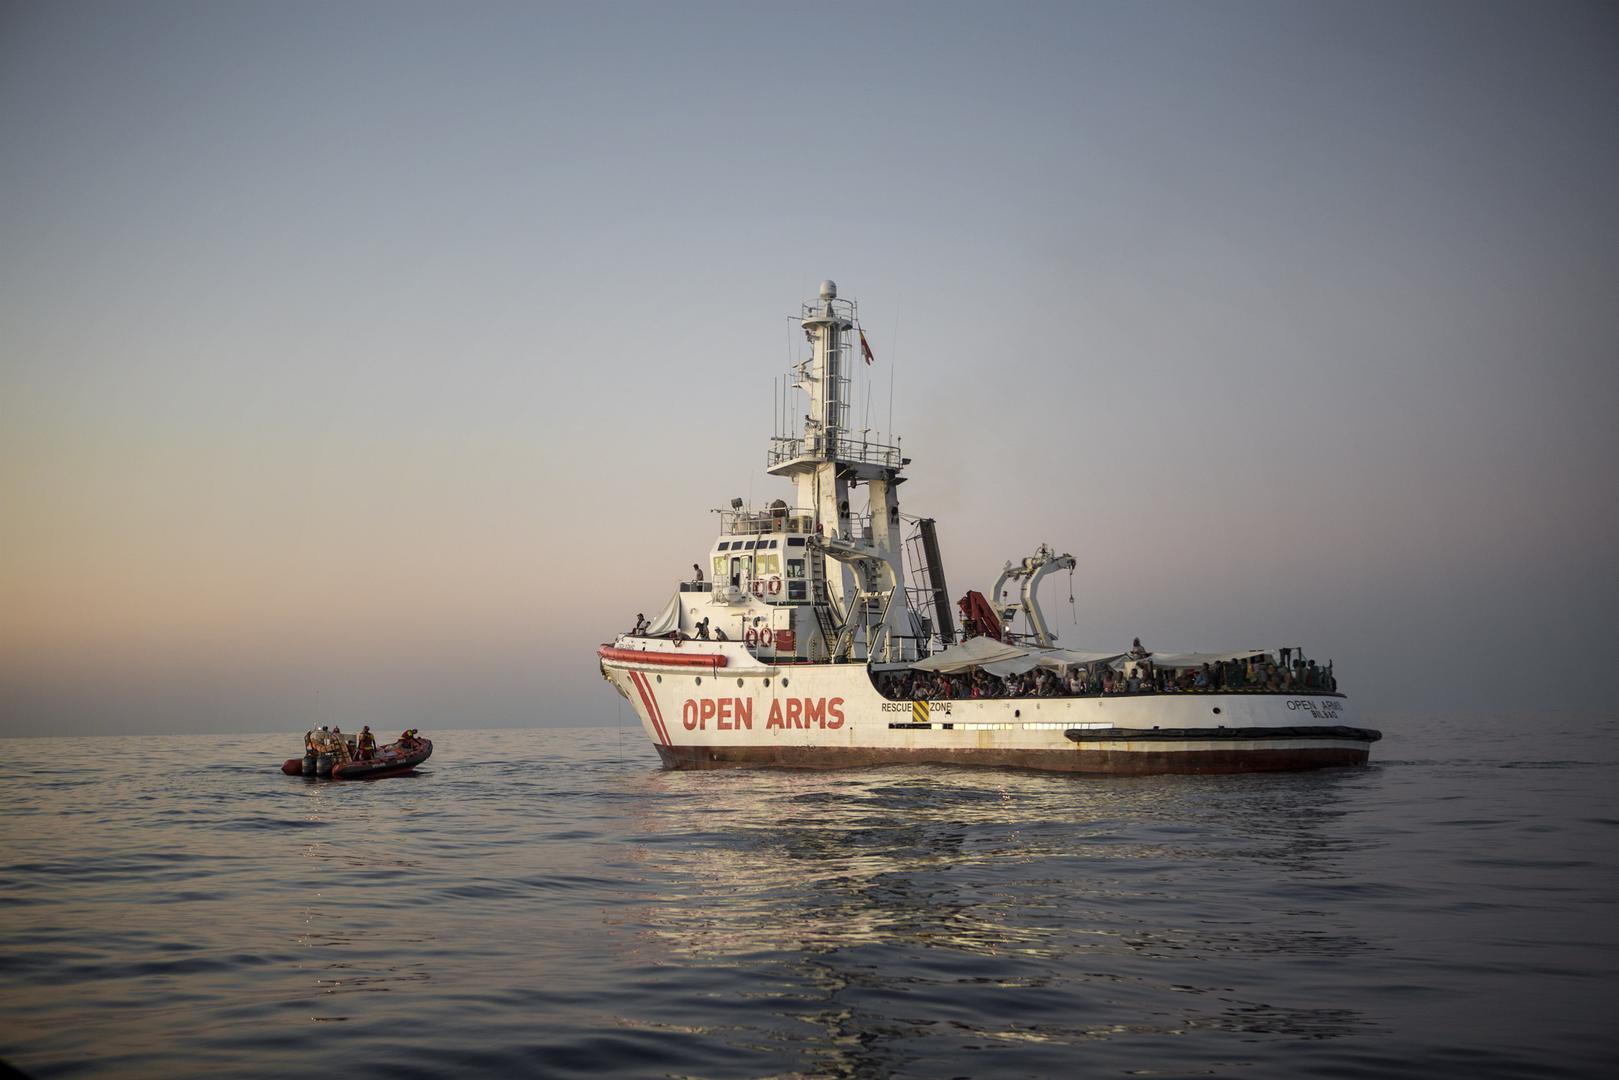 Proactiva's rescue ship Open Arms on mission in November 2017.